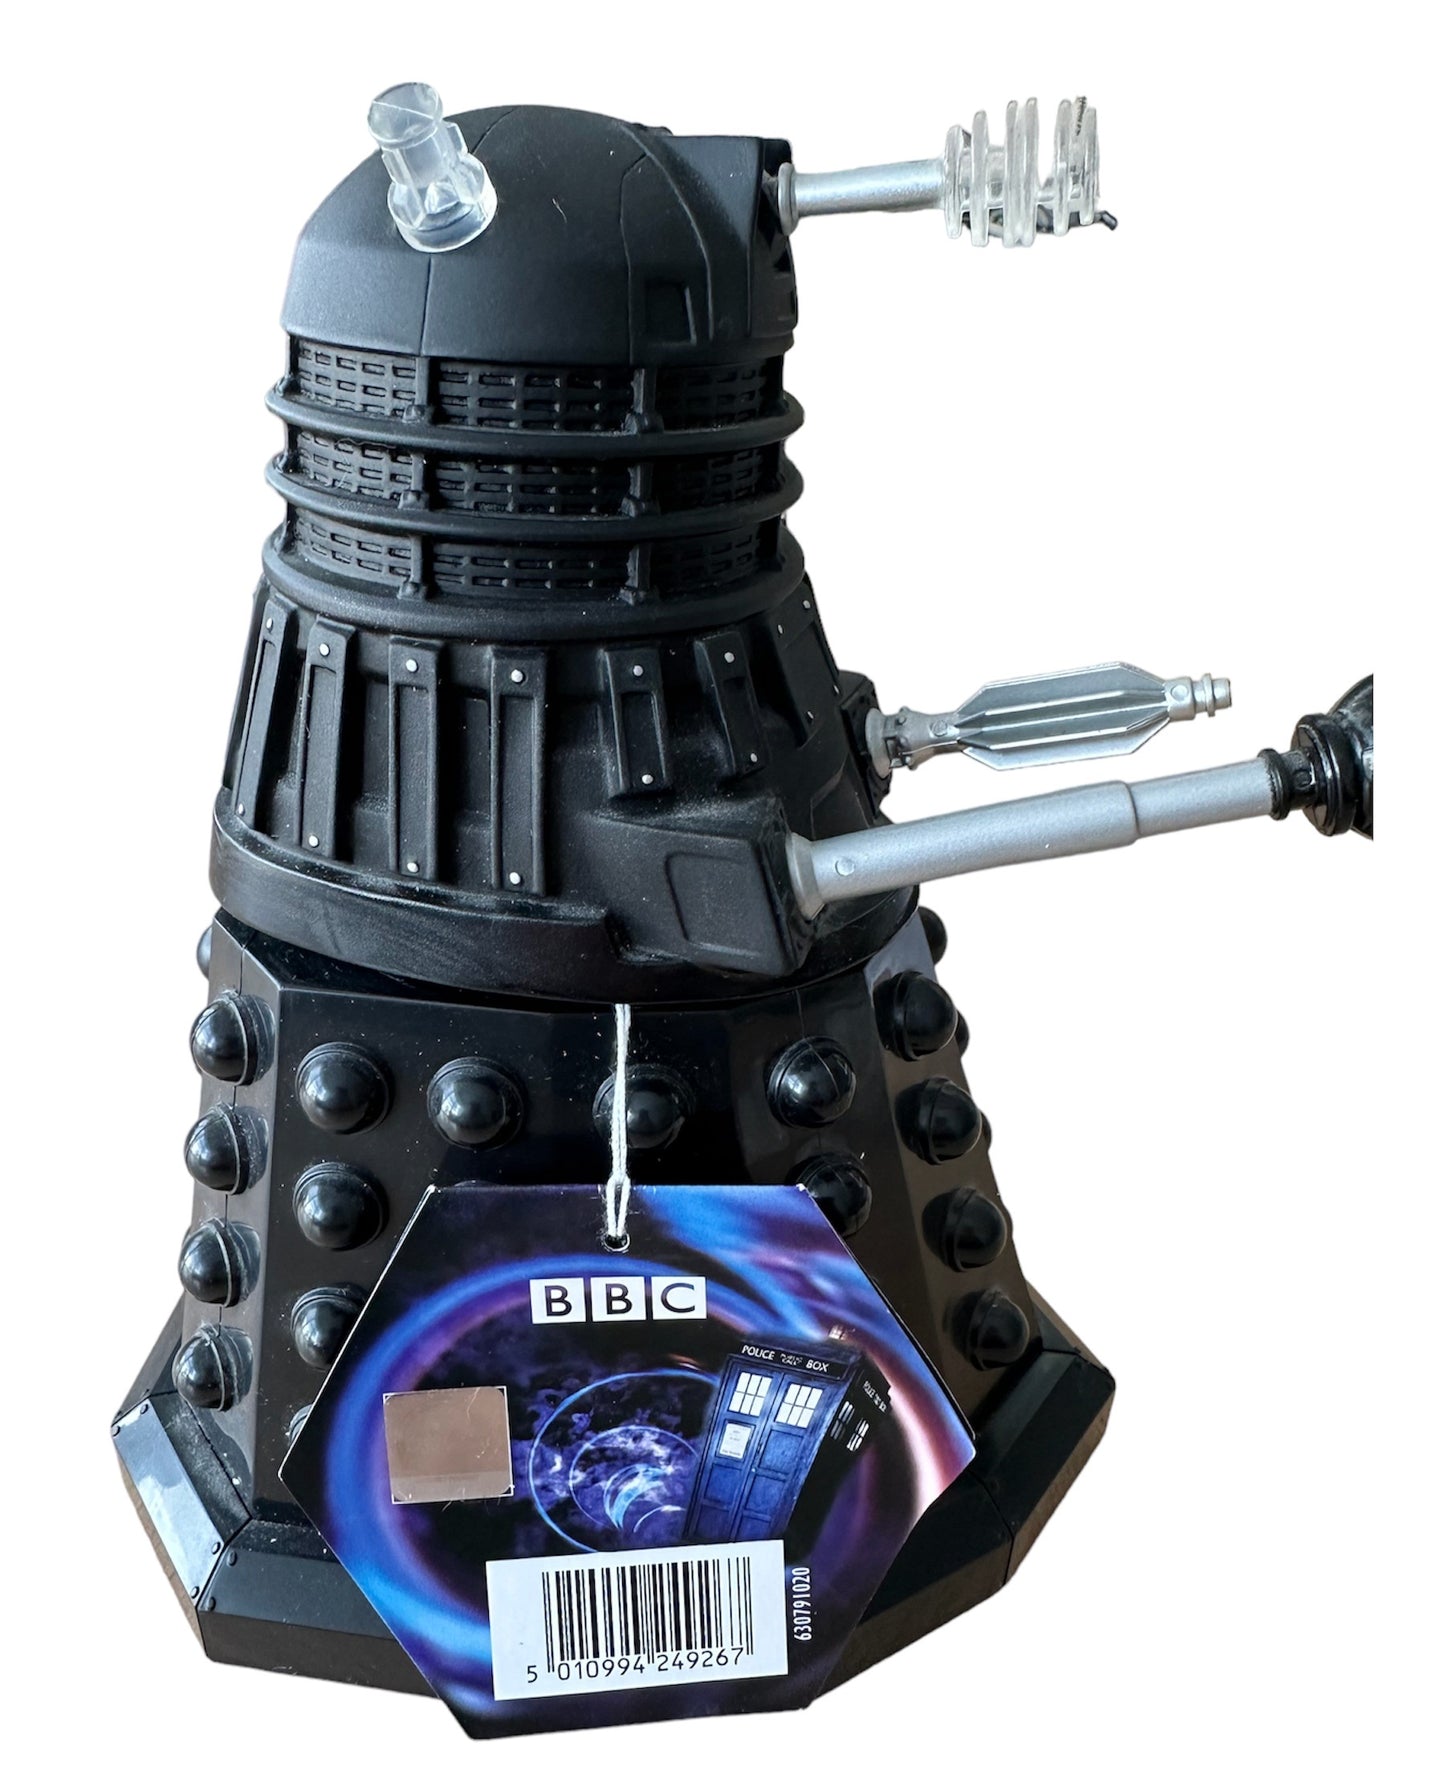 Vintage 2005 Doctor Who The Black Dalek 8 Inch Tall Action Figure Filled With 250ml Of Bubble Bath - Brand New Factory Sealed Shop Stock Room Find